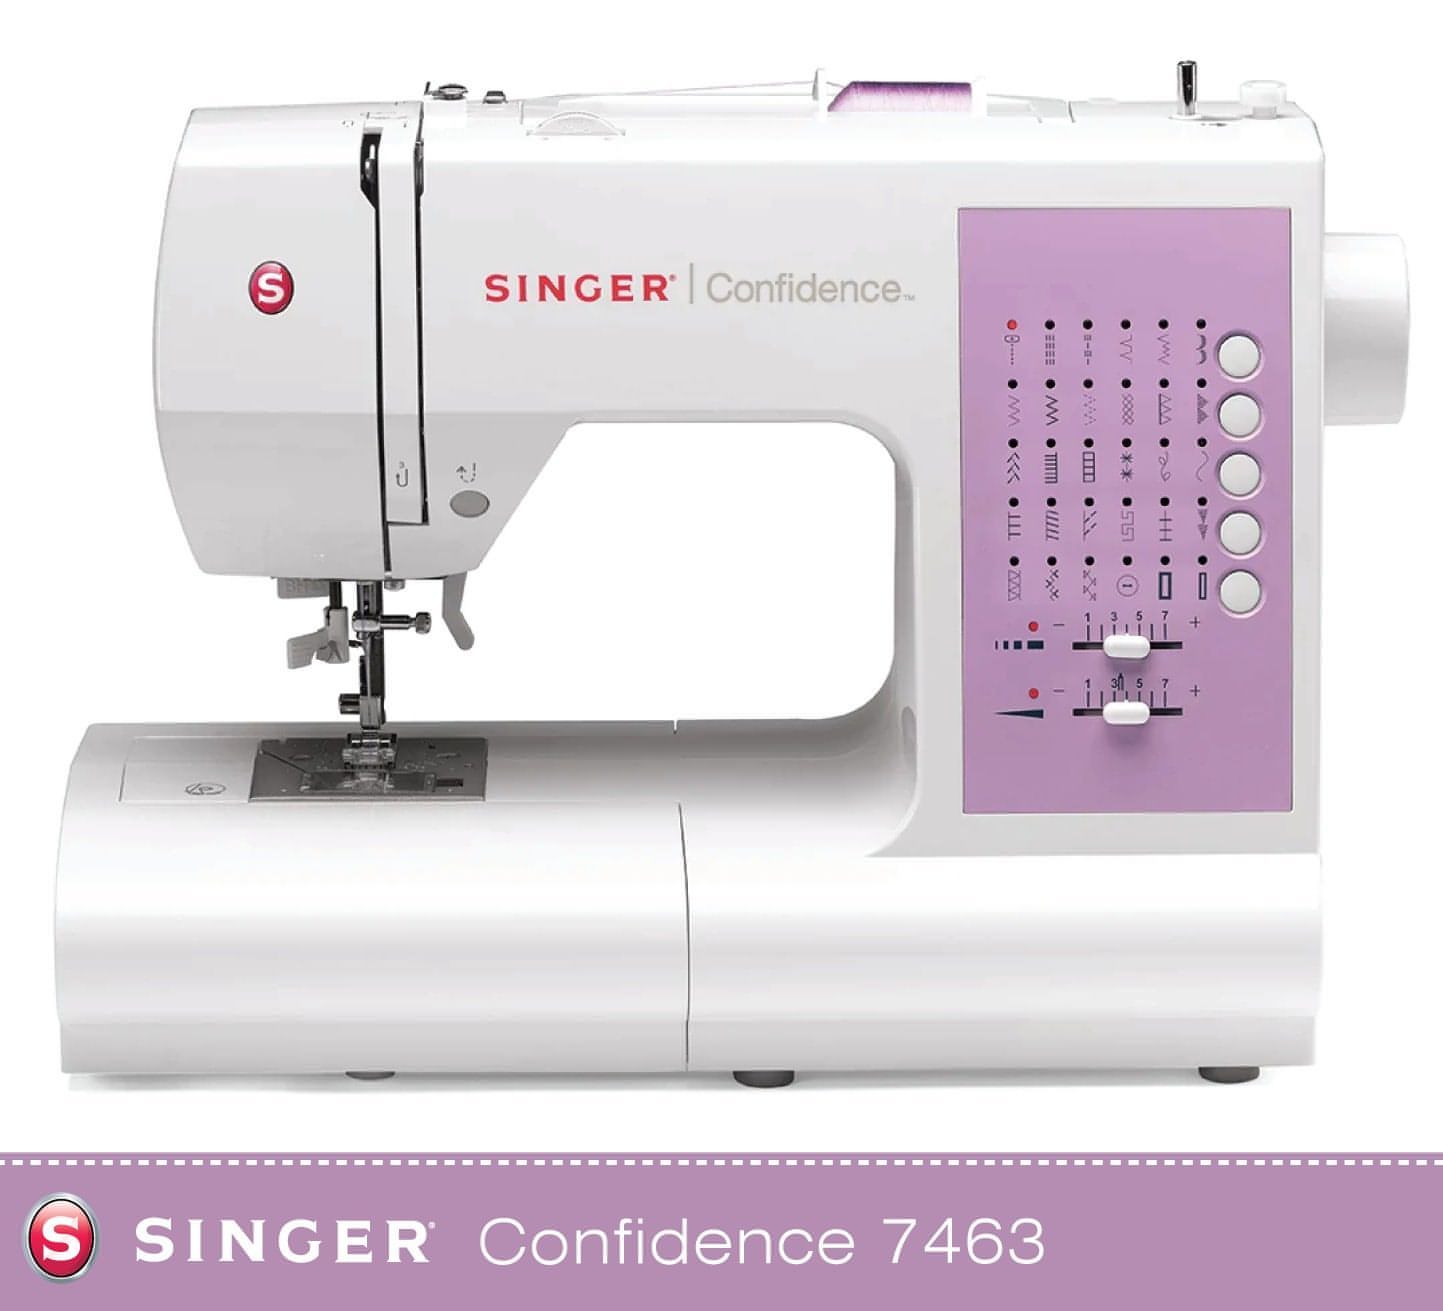 Singer Confidence 7463 Sewing Machine - Free upgrade to 7465 with 50 stitch patterns * Easy to use strong machine with 30 stitch patterns + auto threader *